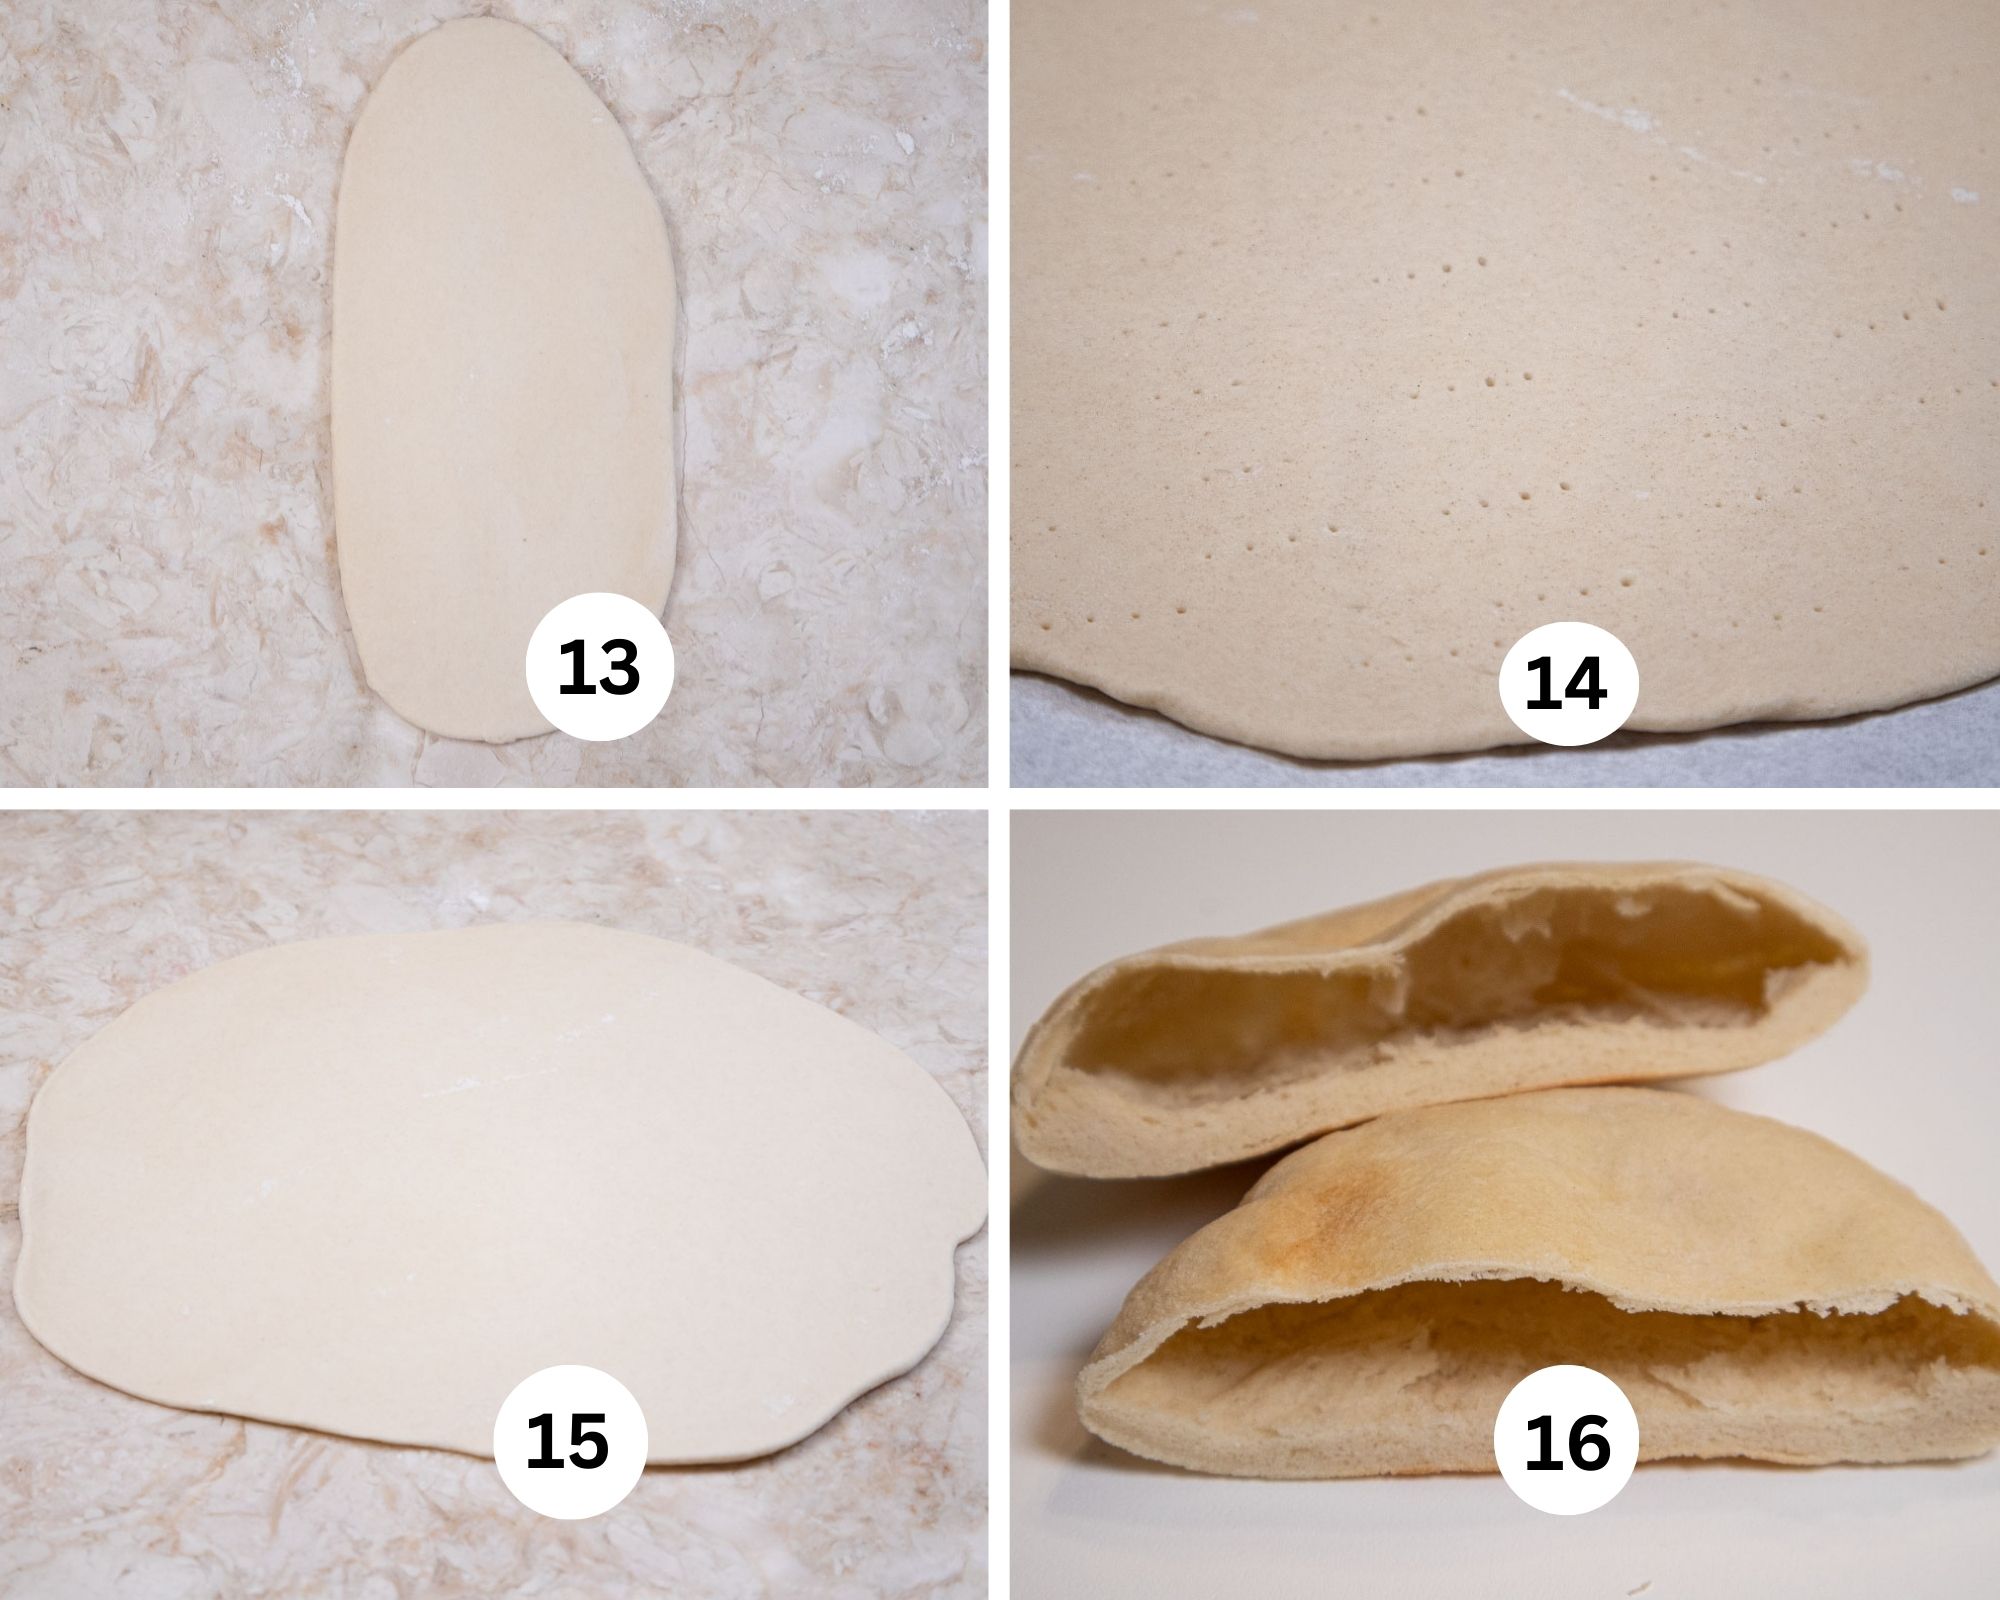 The last collage shows the dough rolled out into an oval, the dough pricked with a fork, the dough rolled into a circle and "Pita pockets" that can be made from the dough.